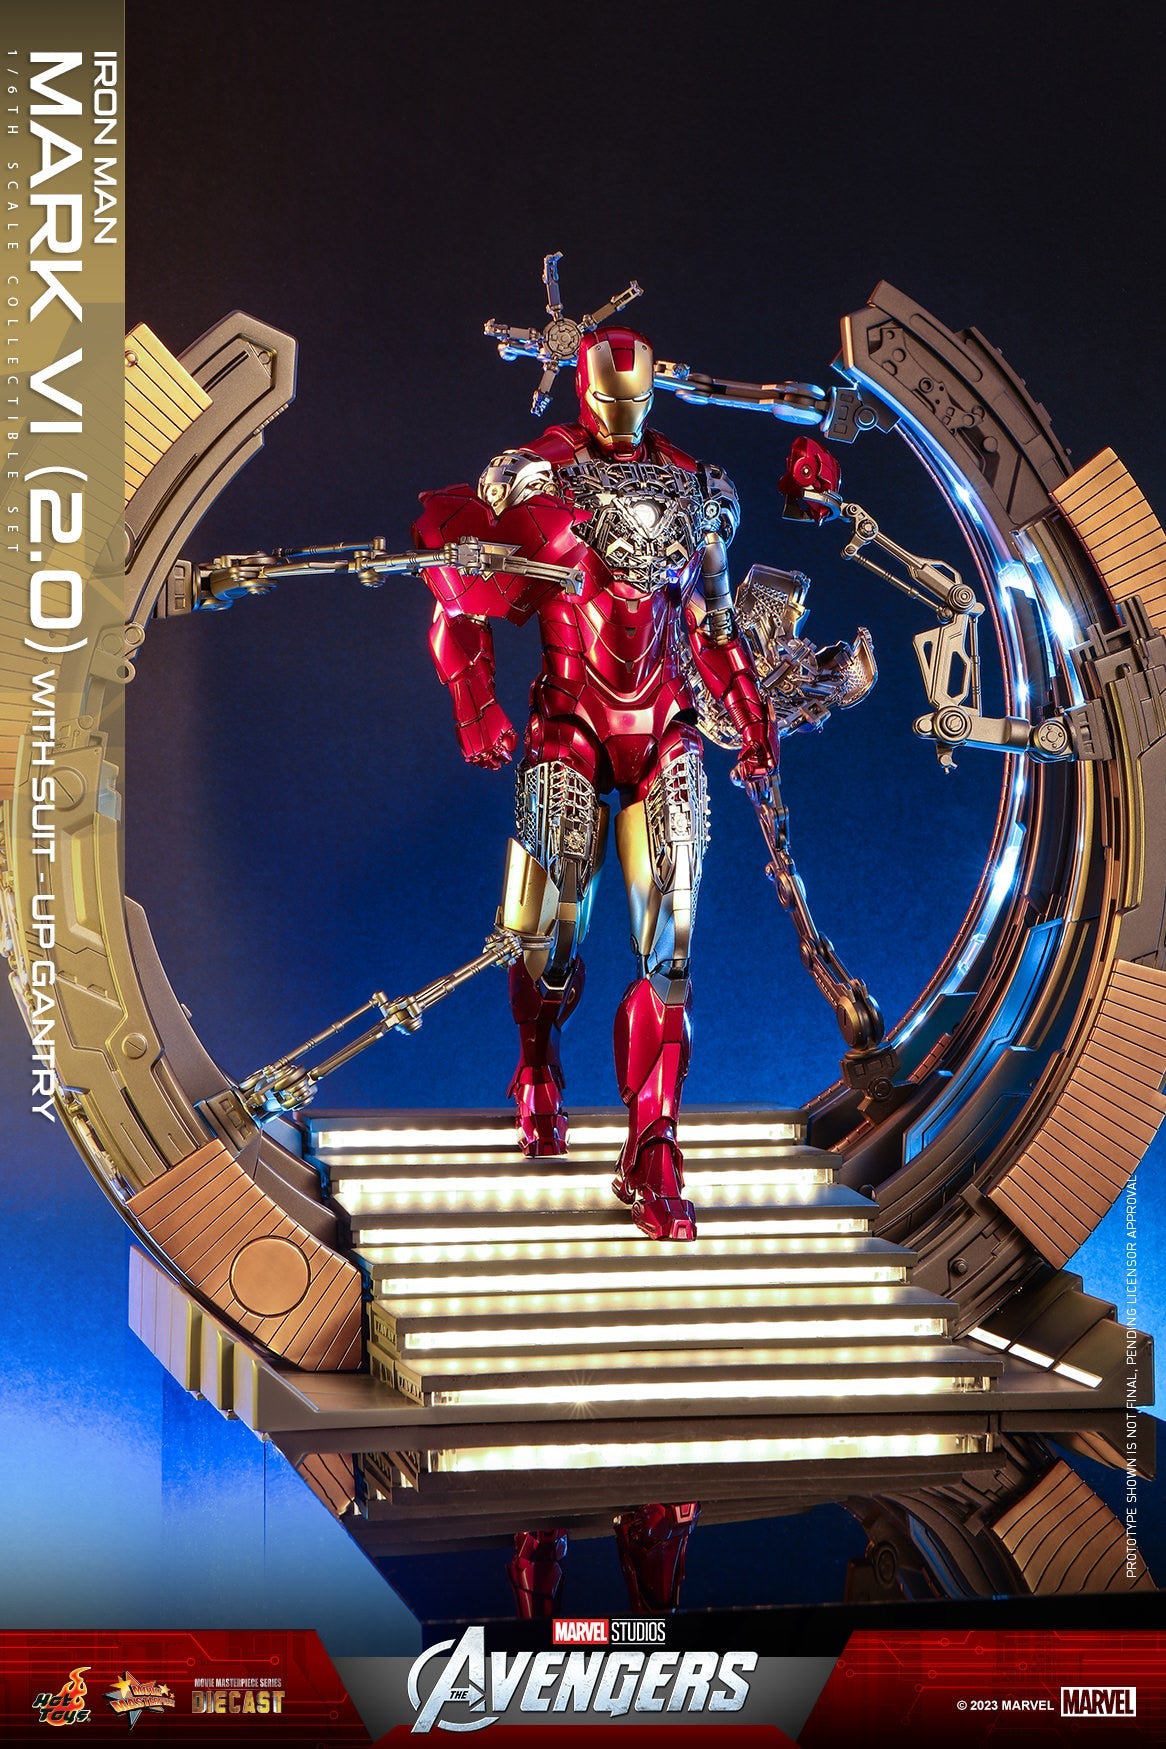 Iron Man: Mark VI (2.0): With Suit Up Gantry: Marvel: MMS688D53 Hot Toys